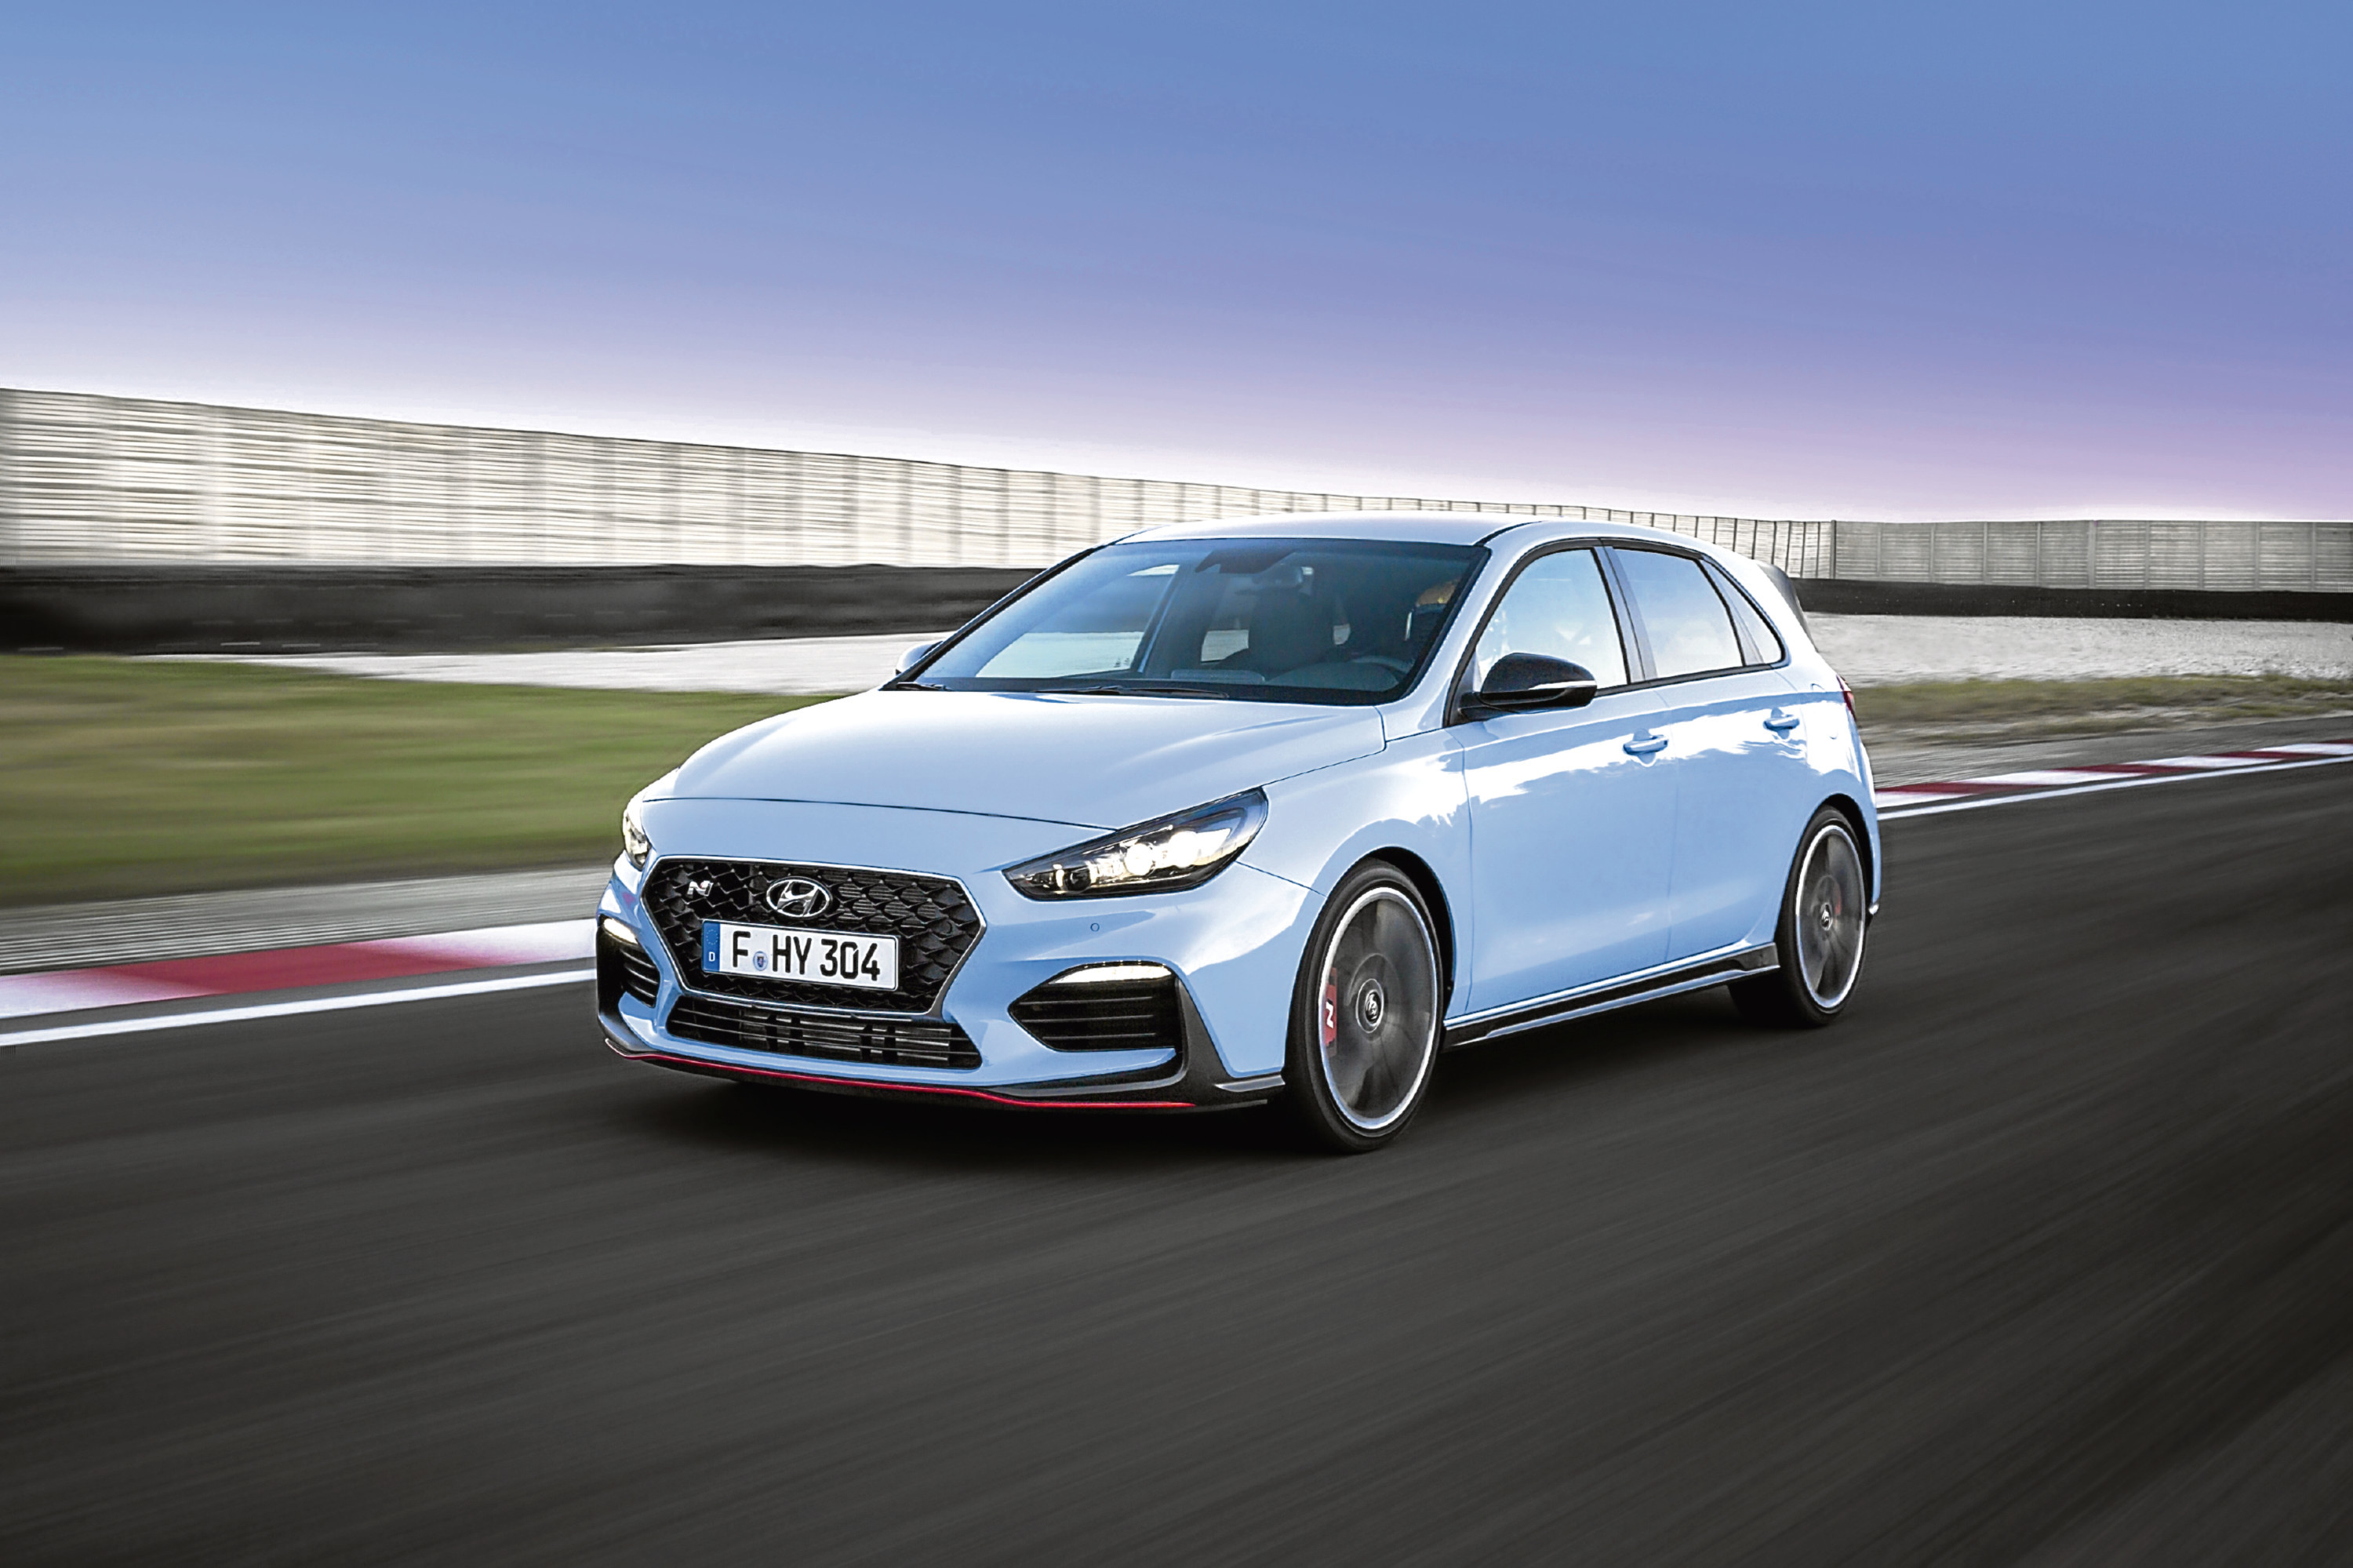 Undated Handout Photo: Hyundai reveals UK pricing and specification for i30 N hot hatch. See PA Feature MOTORING News. Picture credit should read: PA Photo/Handout. WARNING: This picture must only be used to accompany PA Feature MOTORING News.